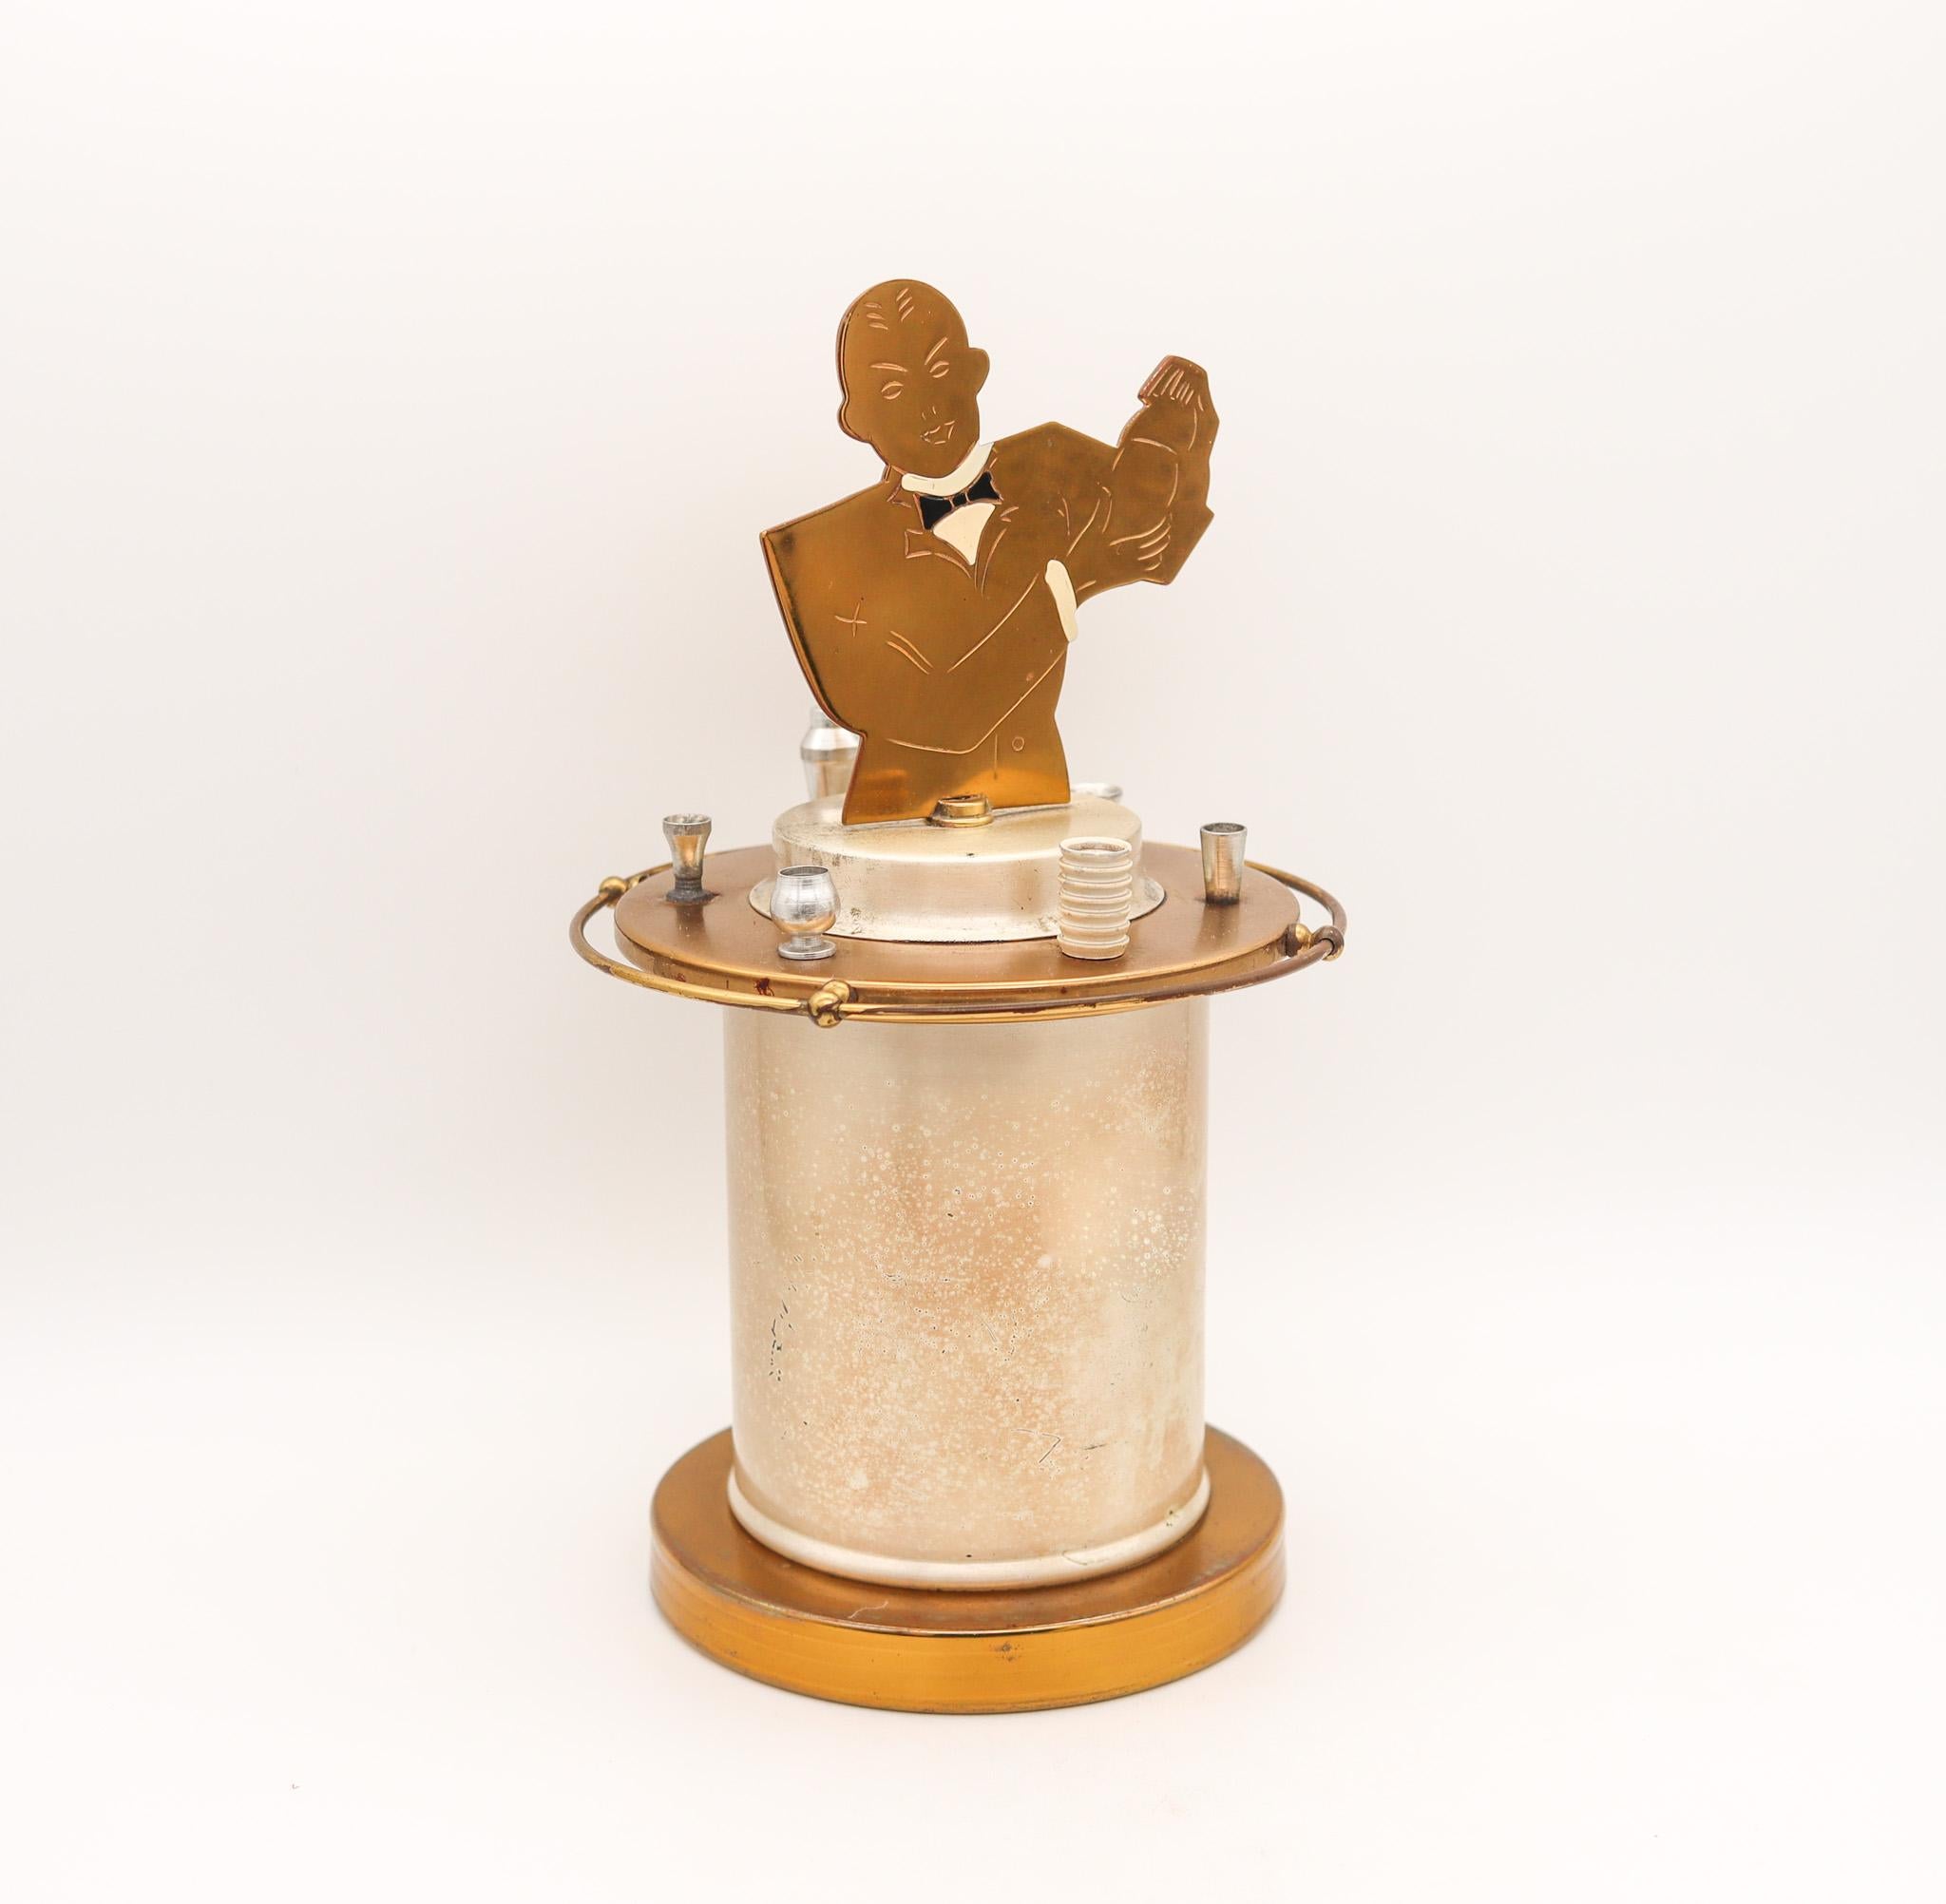 Bar man mechanical cigarette dispenser box.

An exceptional and very beautiful desk piece, created in Germany during the art deco period, back in the 1935. This is a rare barman mechanical cigarettes dispenser box with 25 movable elements to fit